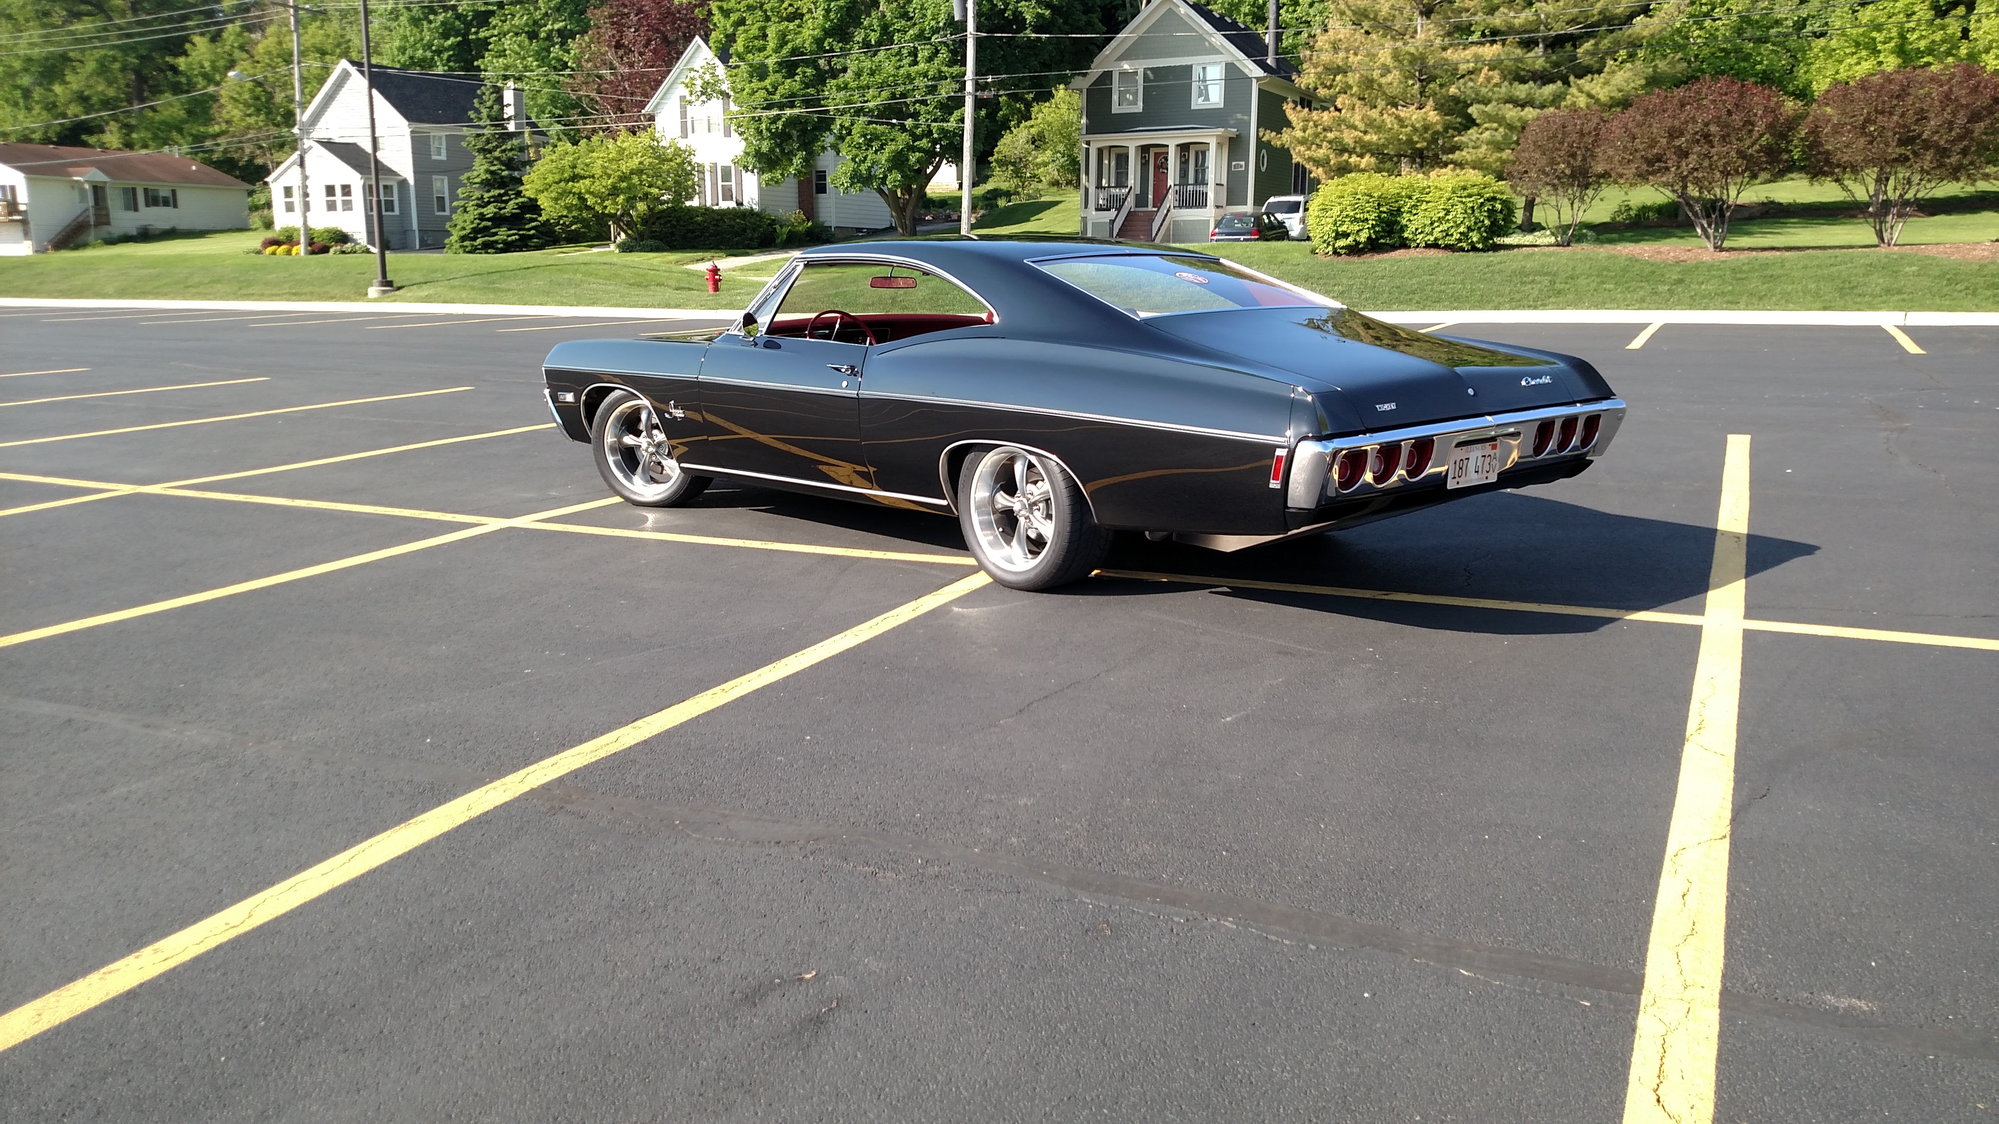 1968 Chevrolet Impala - 950 Horsepower 1968 Impala Fastback For Sale - Used - VIN 164878J170000 - 15,000 Miles - 8 cyl - 2WD - Automatic - Coupe - Black - Cary, IL 60013, United States